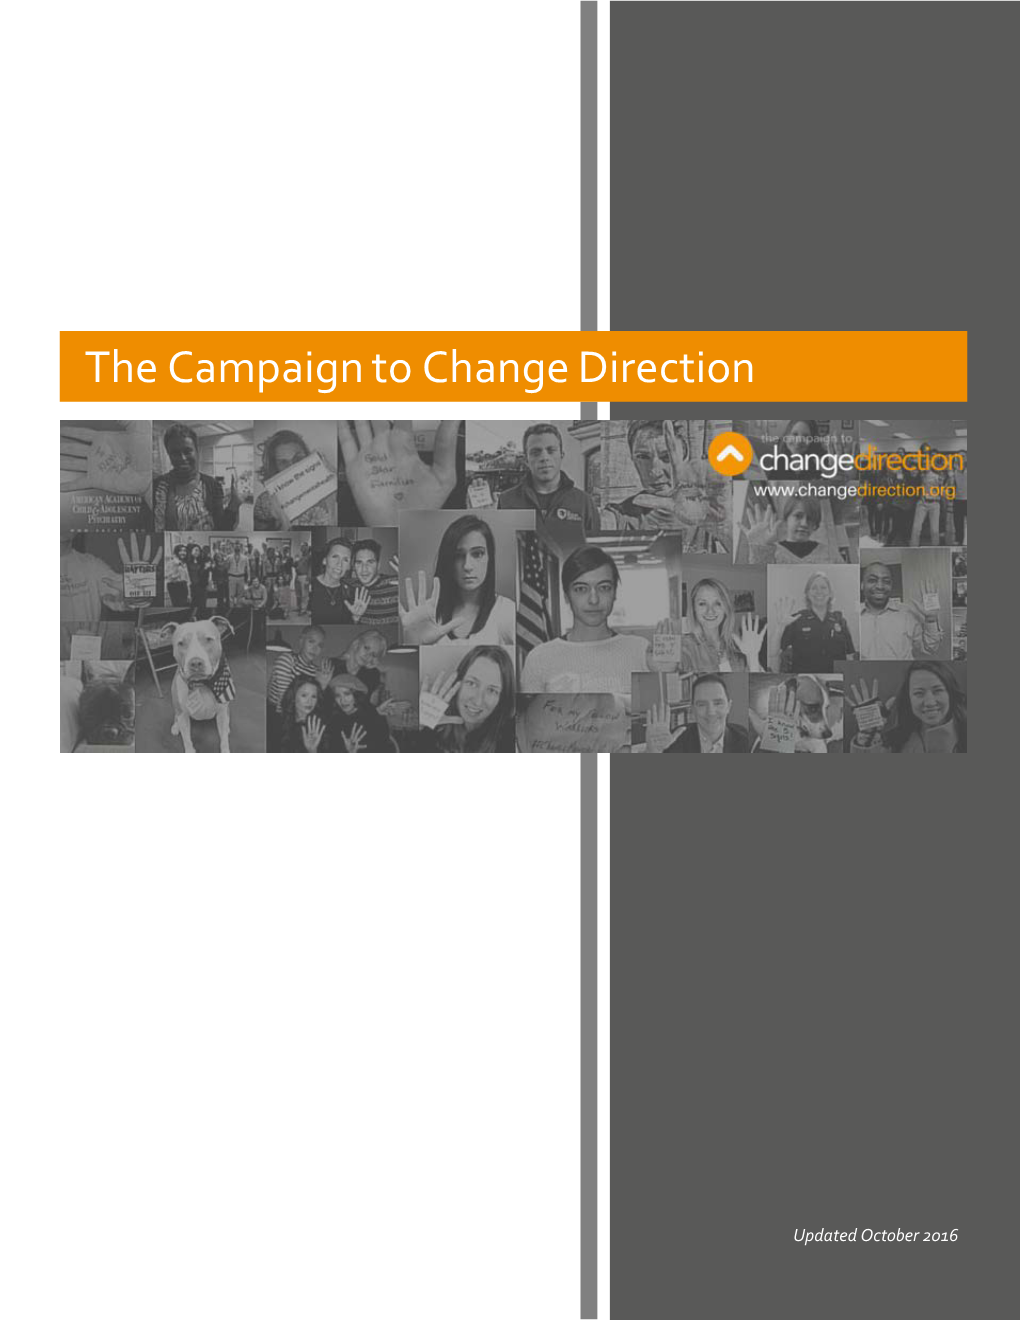 The Campaign to Change Direction Materials